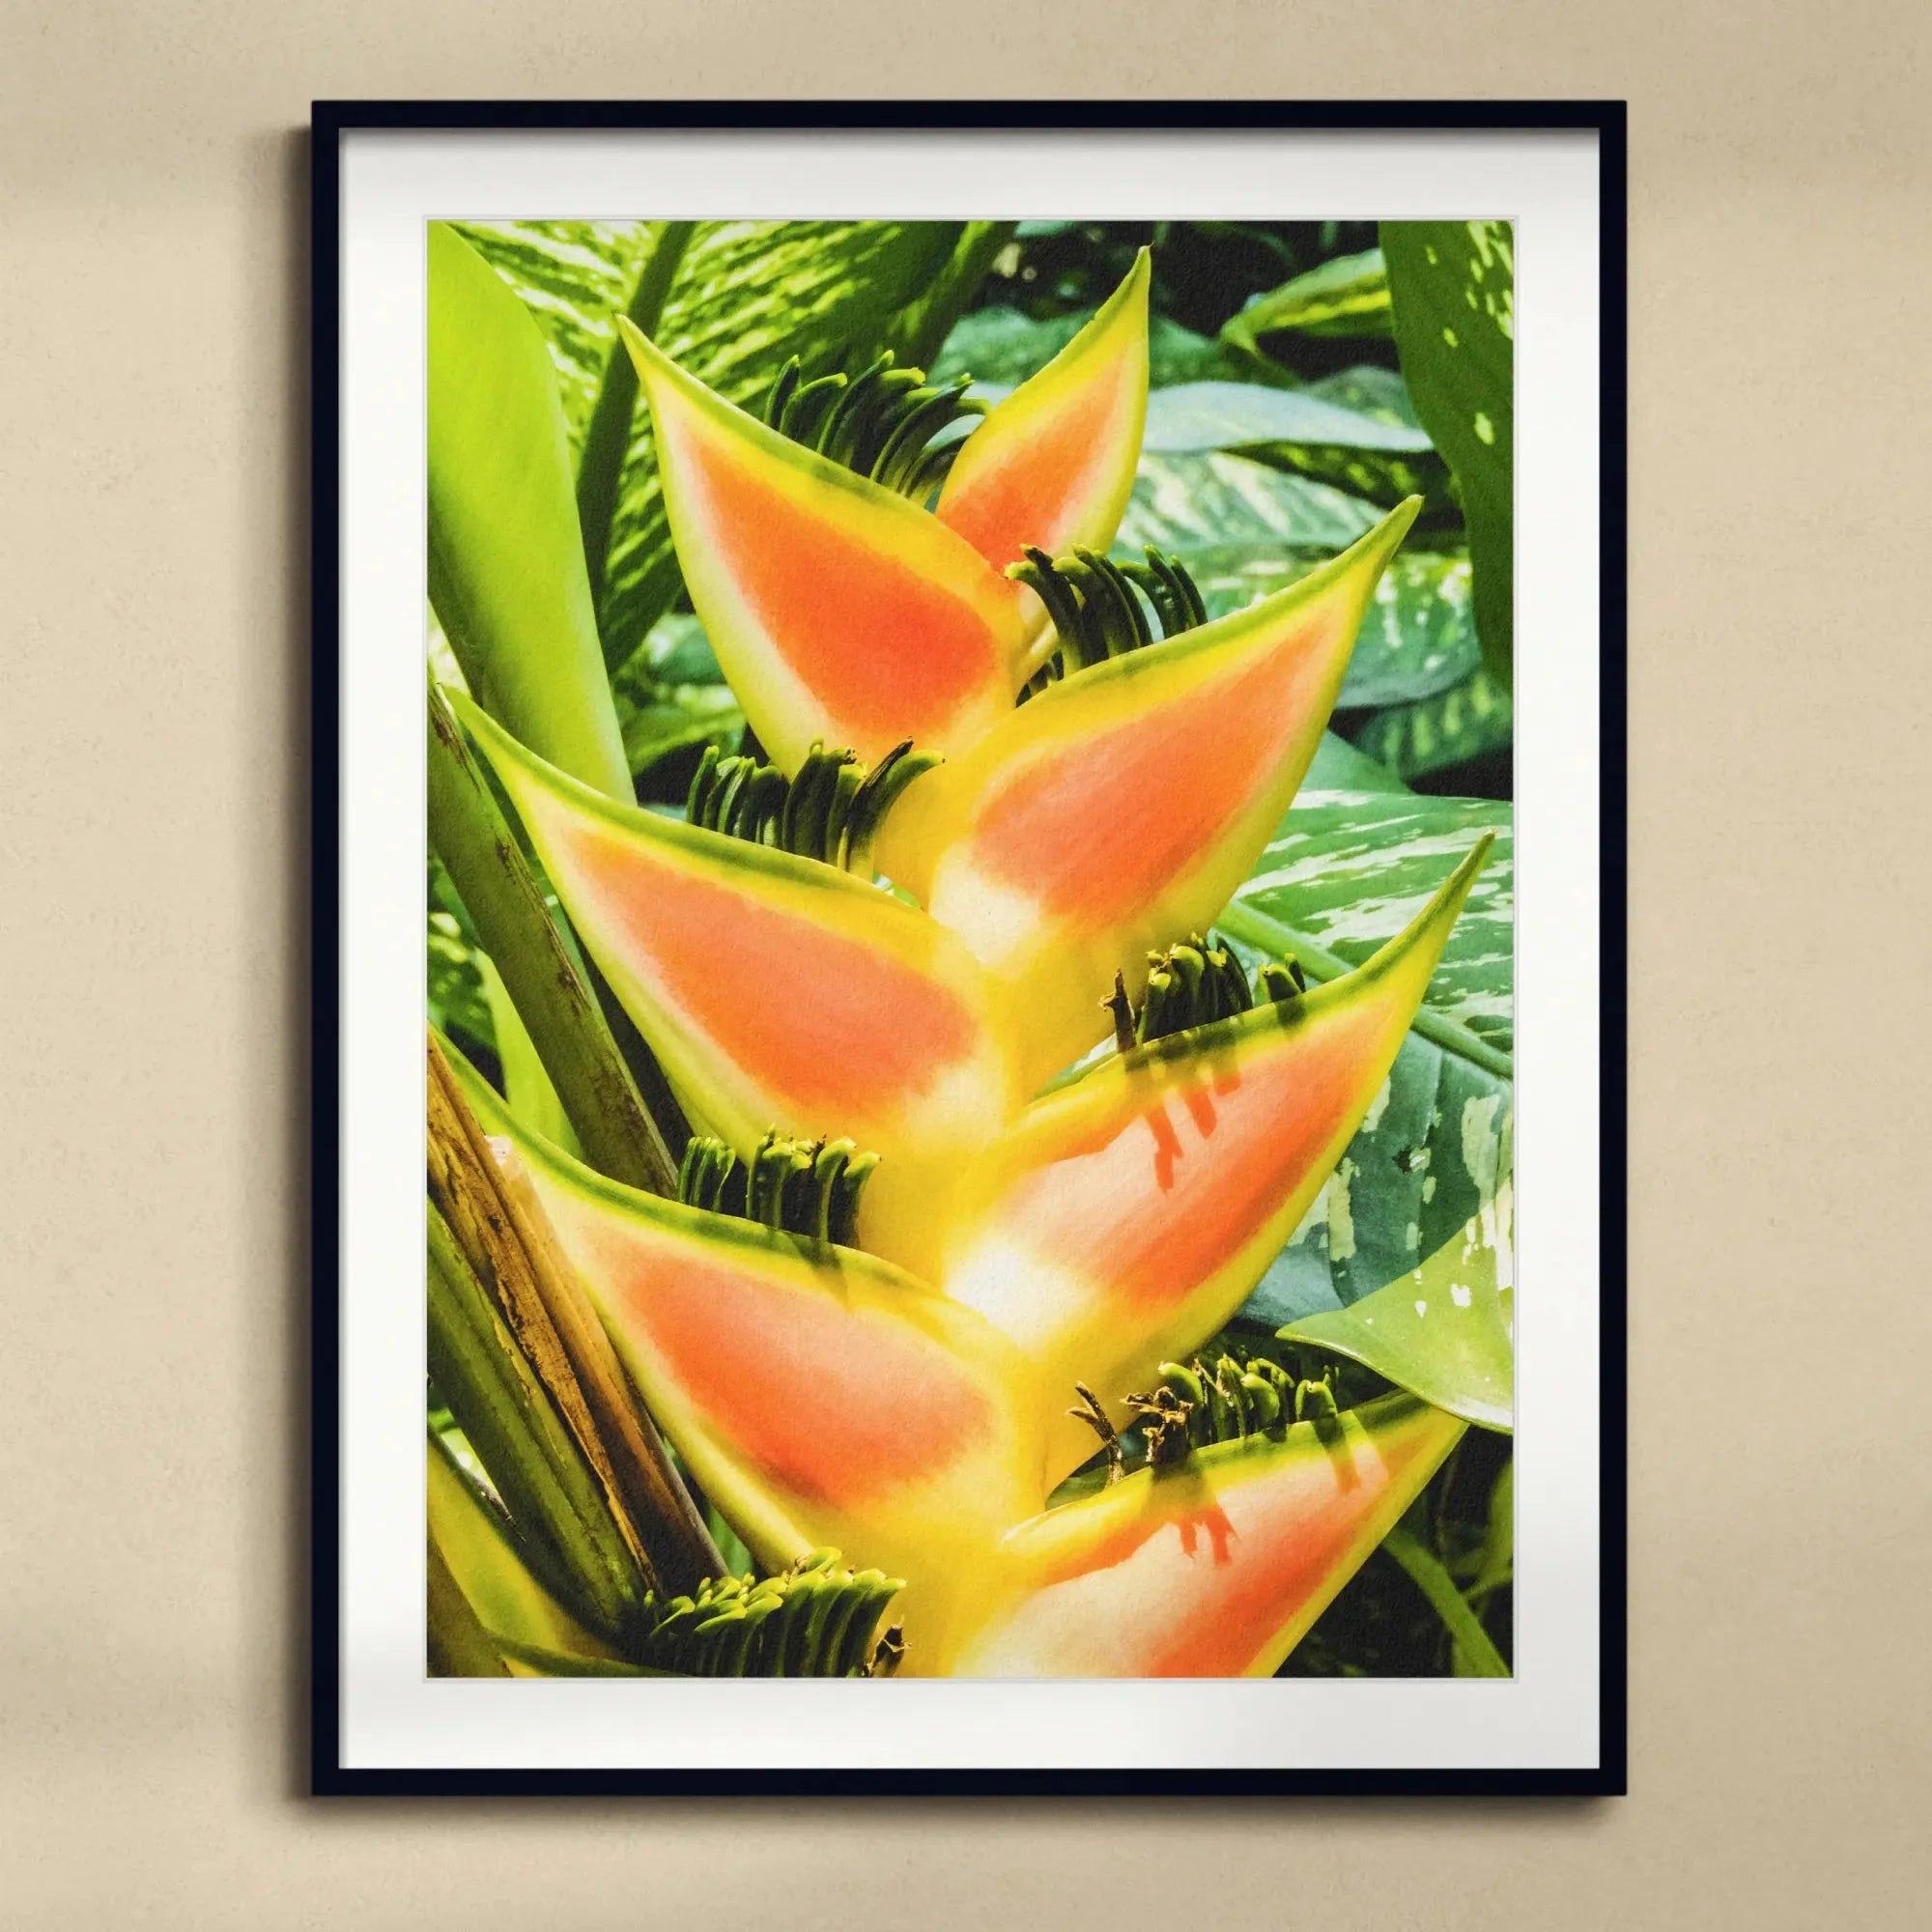 Showstopper Framed & Mounted Print - Posters Prints & Visual Artwork - Aesthetic Art